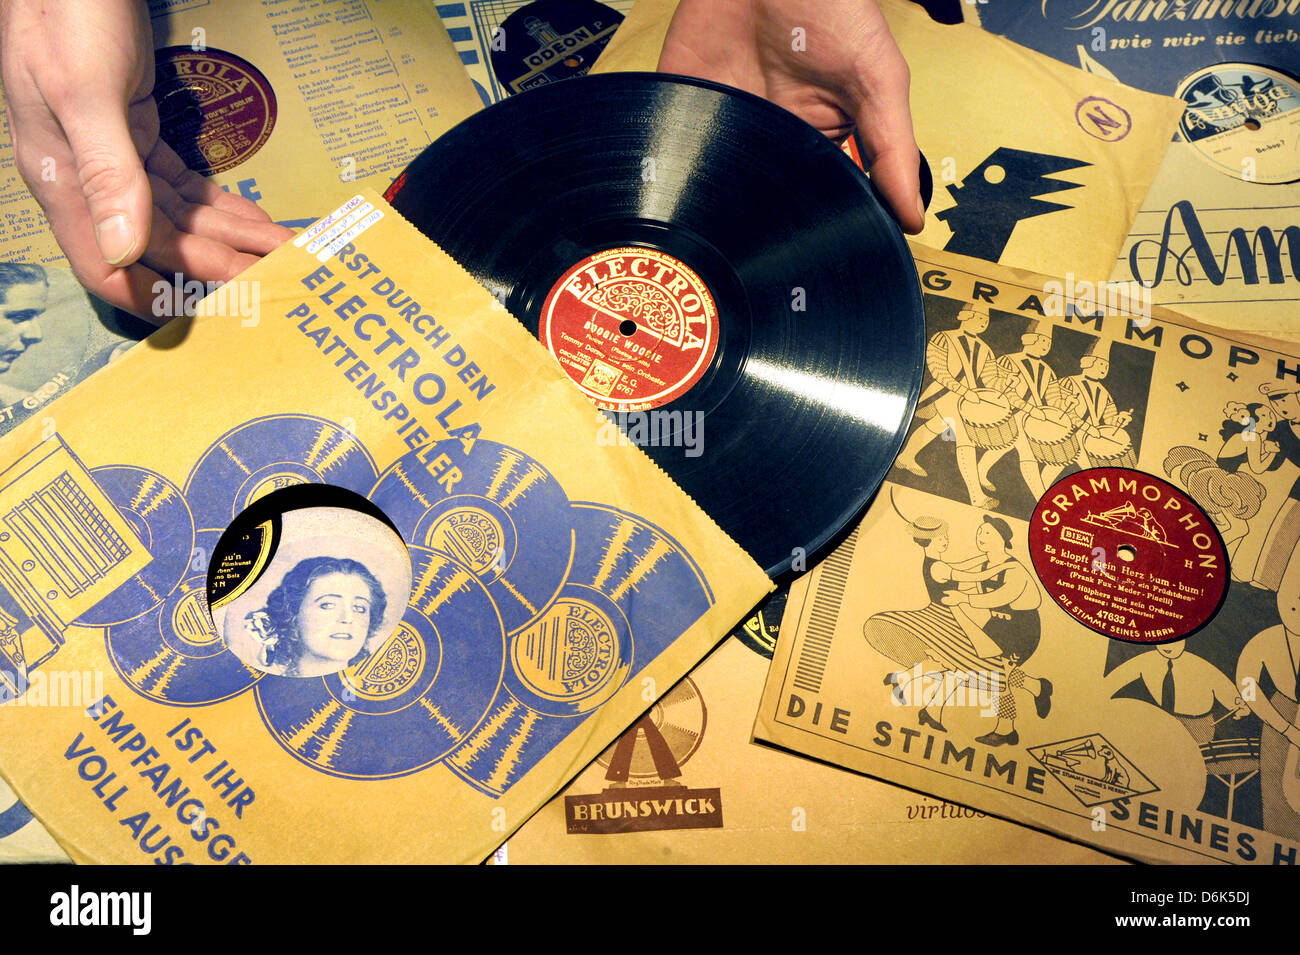 Berlin-based discjockey and gramophone records collector Stephan Wuthe presents some of his records in Leipzig, Germany, 17 March 2012. Swing music and records have experienced a renaissance and become en vogue again. Photo: Waltraud Grubitzsch Stock Photo